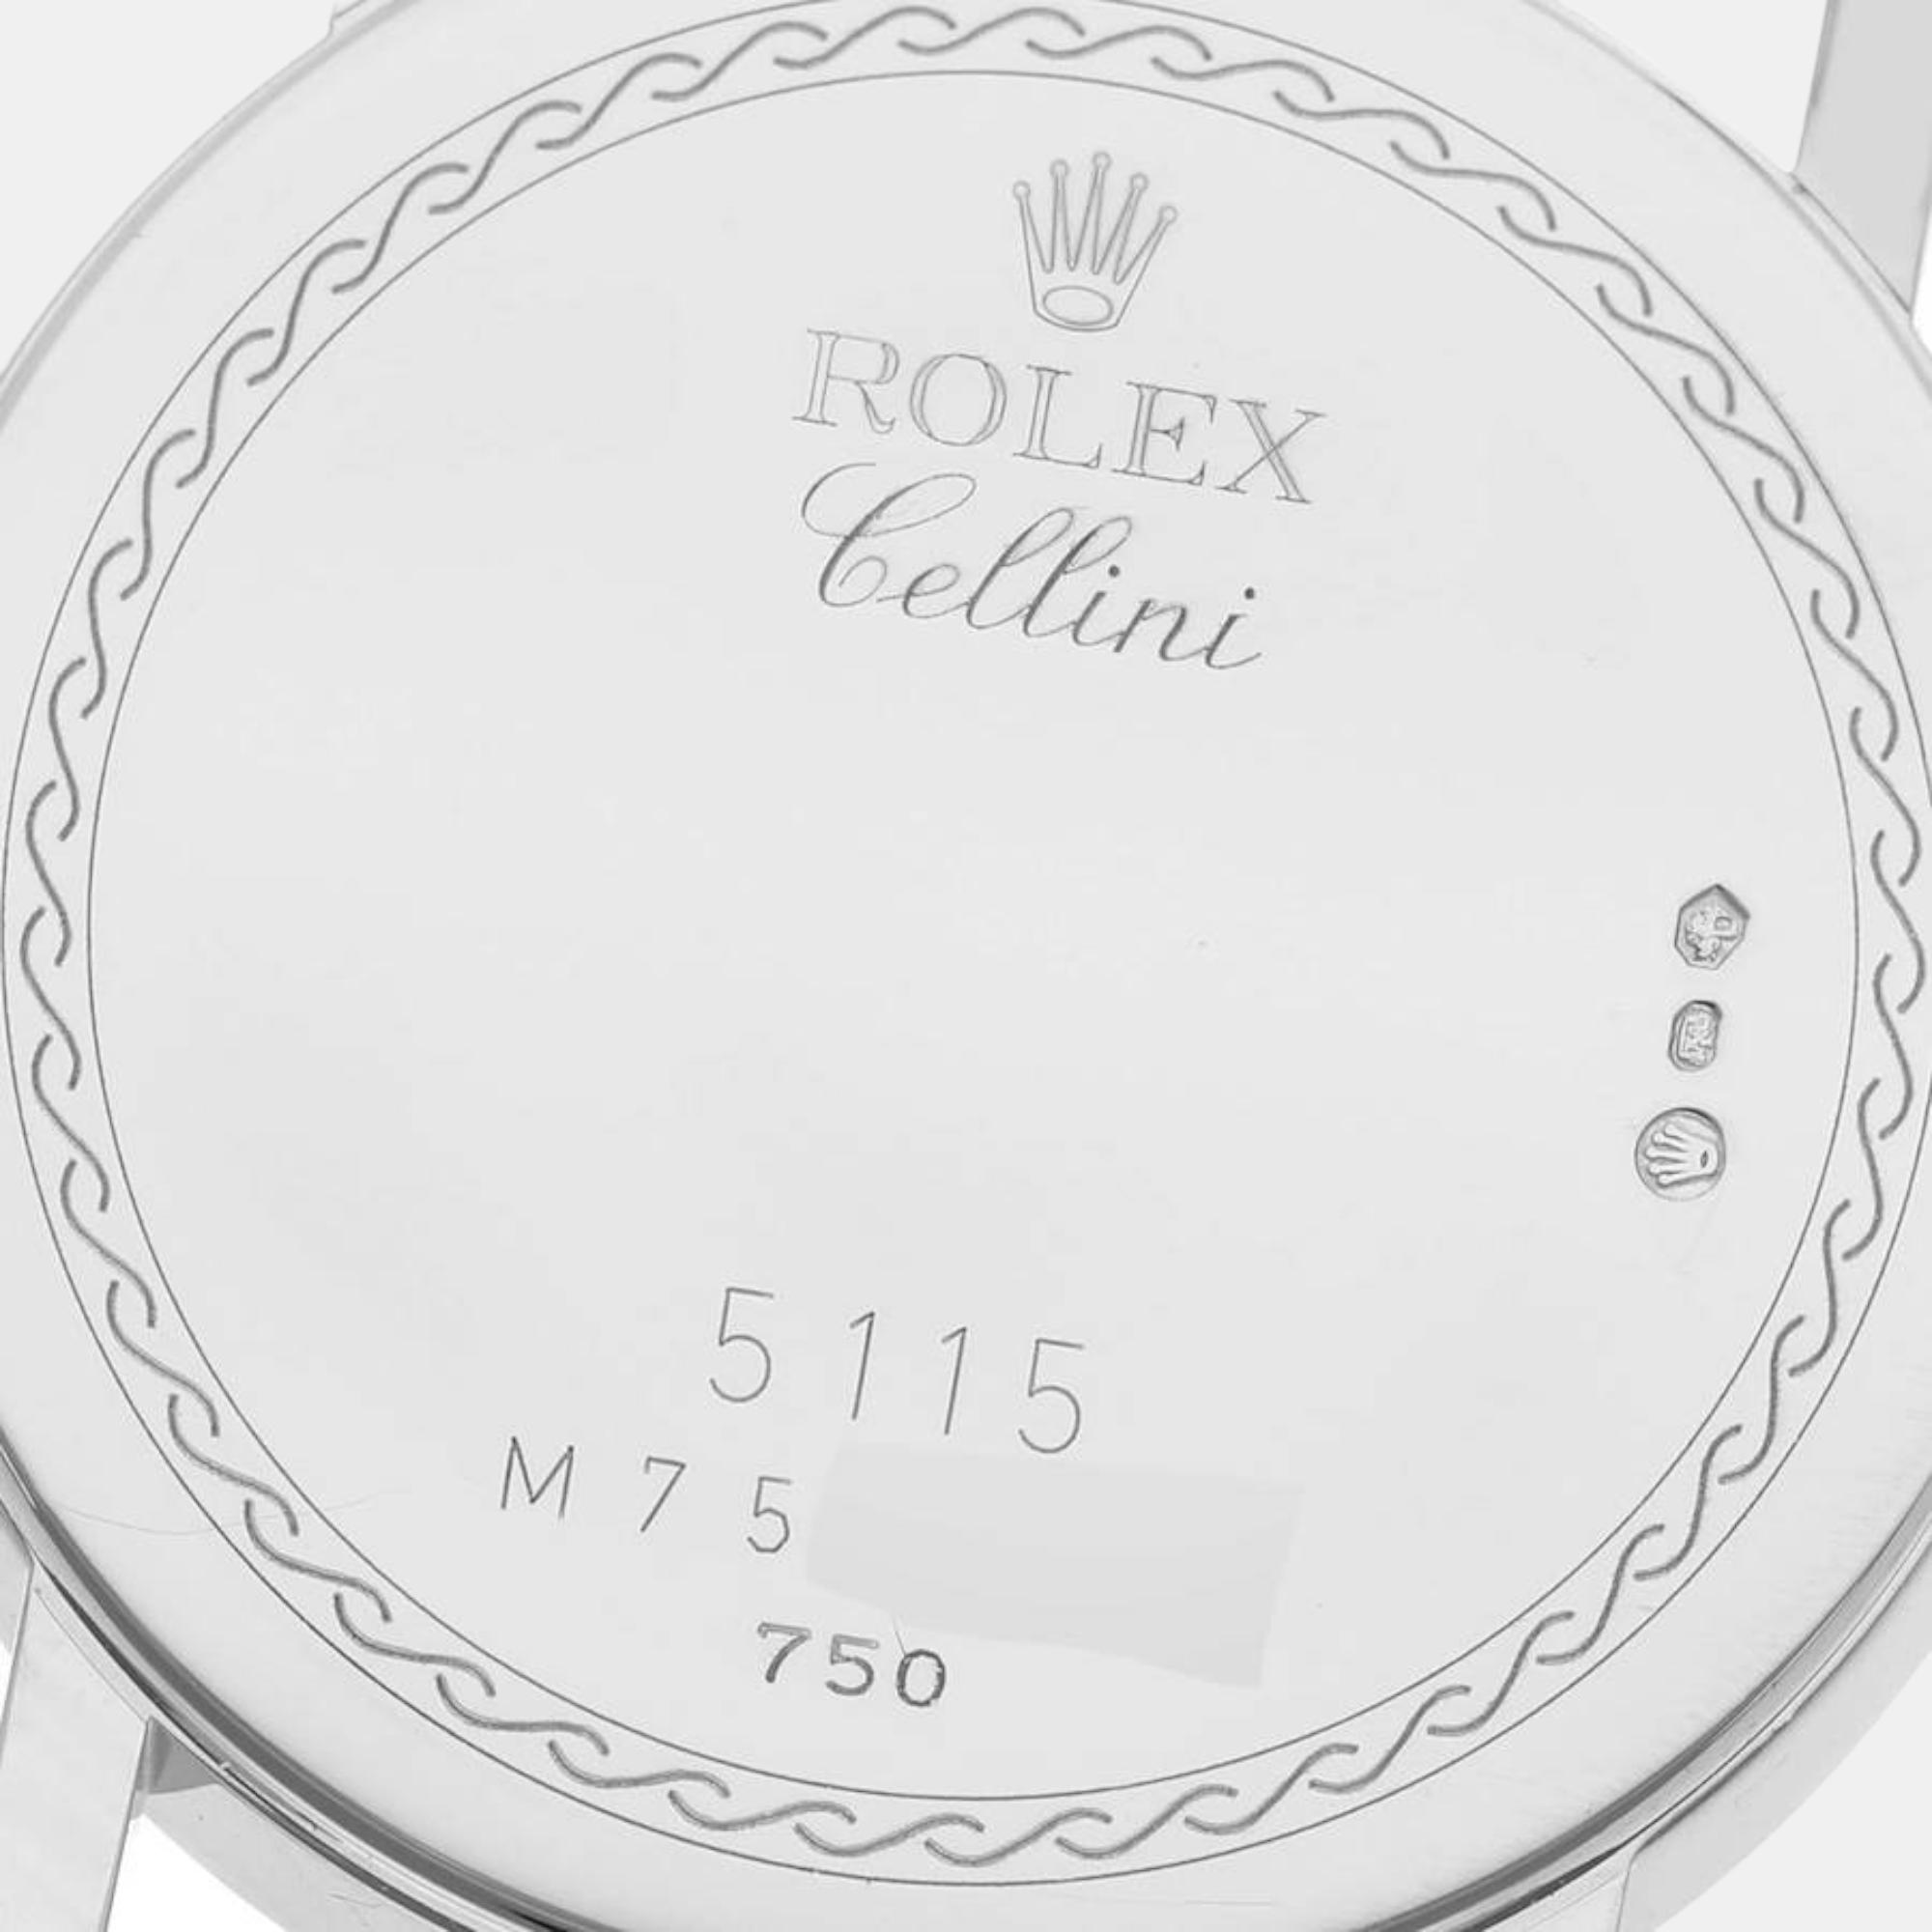 Rolex Cellini Classic White Gold Decorated Silver Dial Mens Watch 5115